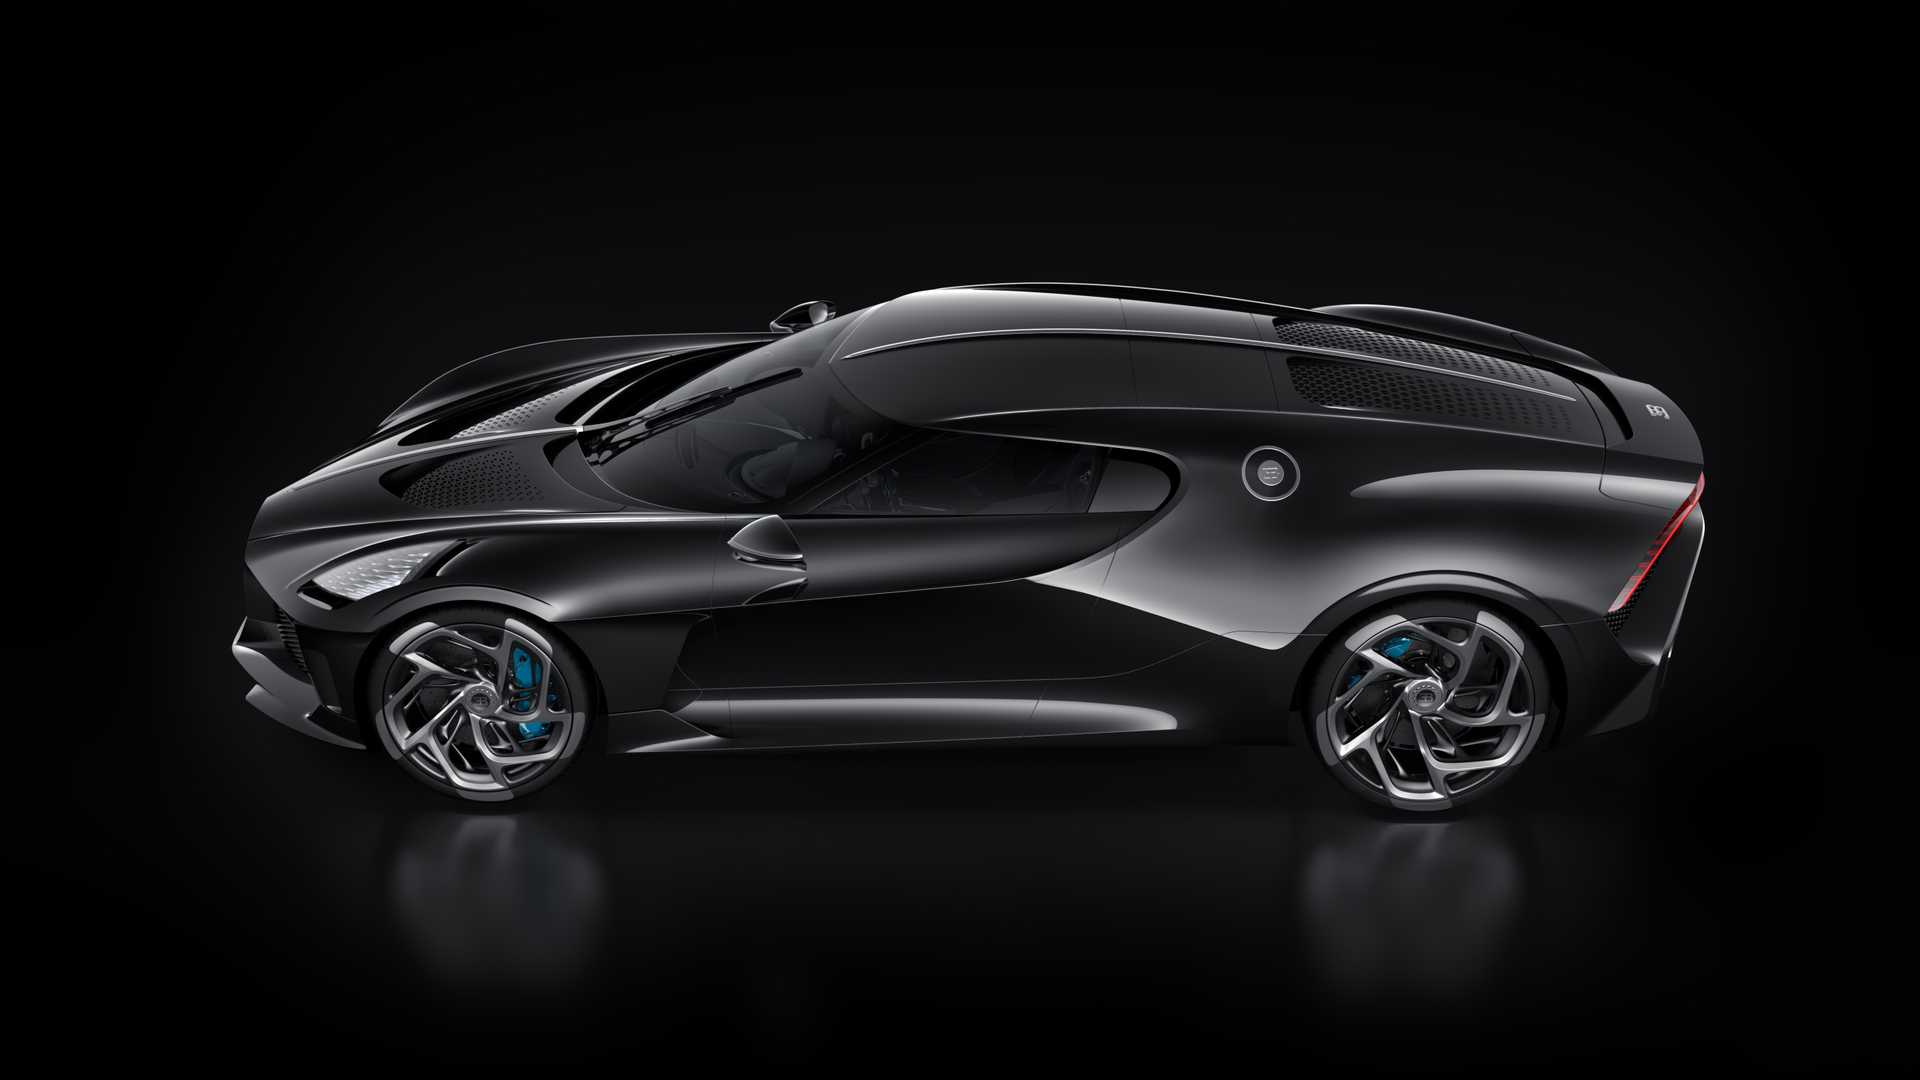 Bugatti Edition Chiron Noire Limited to 20 Units, Priced at